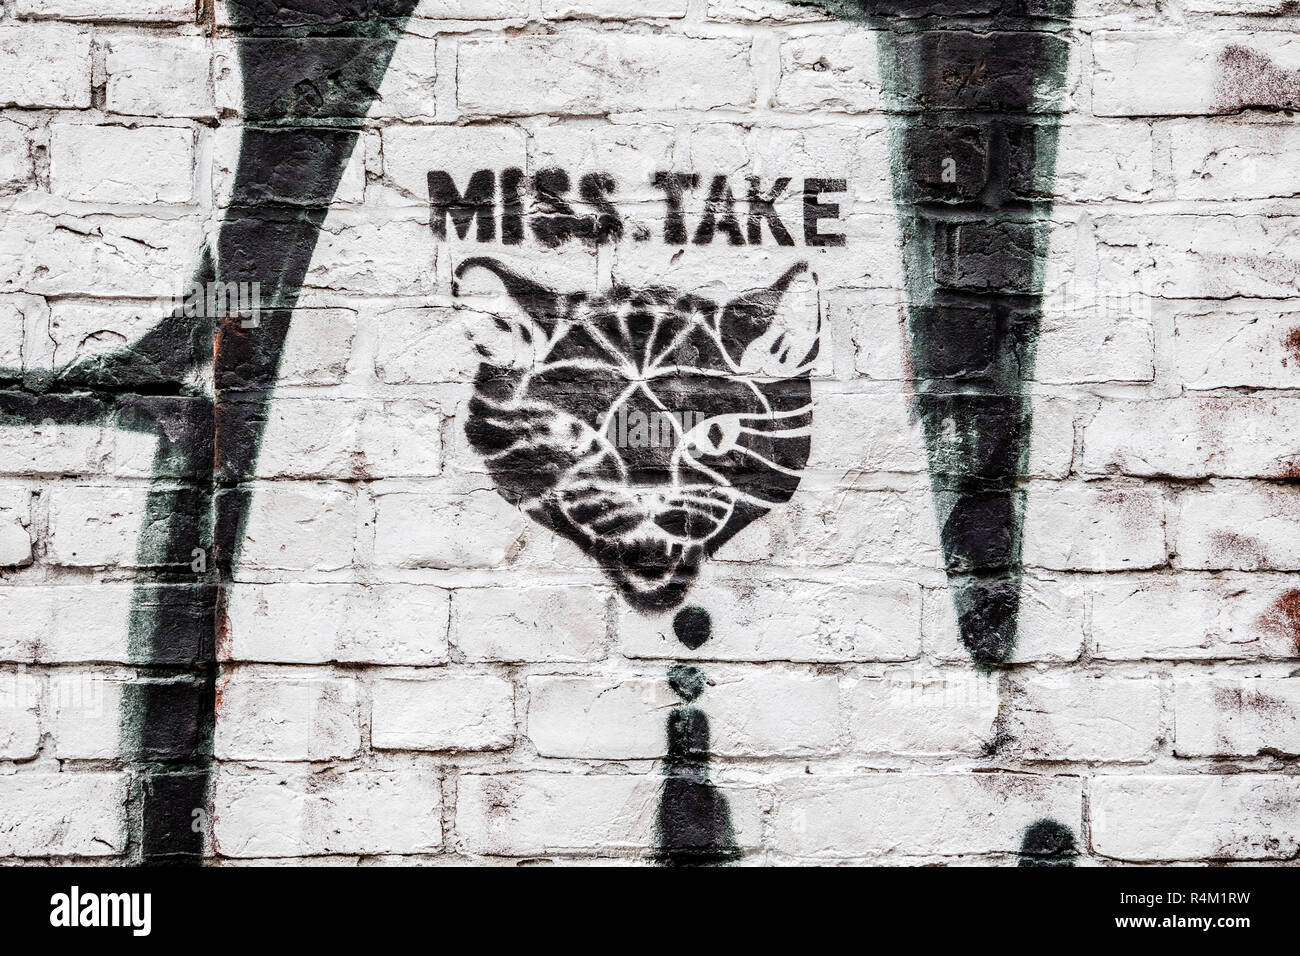 Miss Take. Portrait of a Cat as Graffiti on a Brick Wall. What does this cat graffiti allude to? The predatory art of cats or to the fact that the many cat photos on the Internet are a flaw? Stock Photo